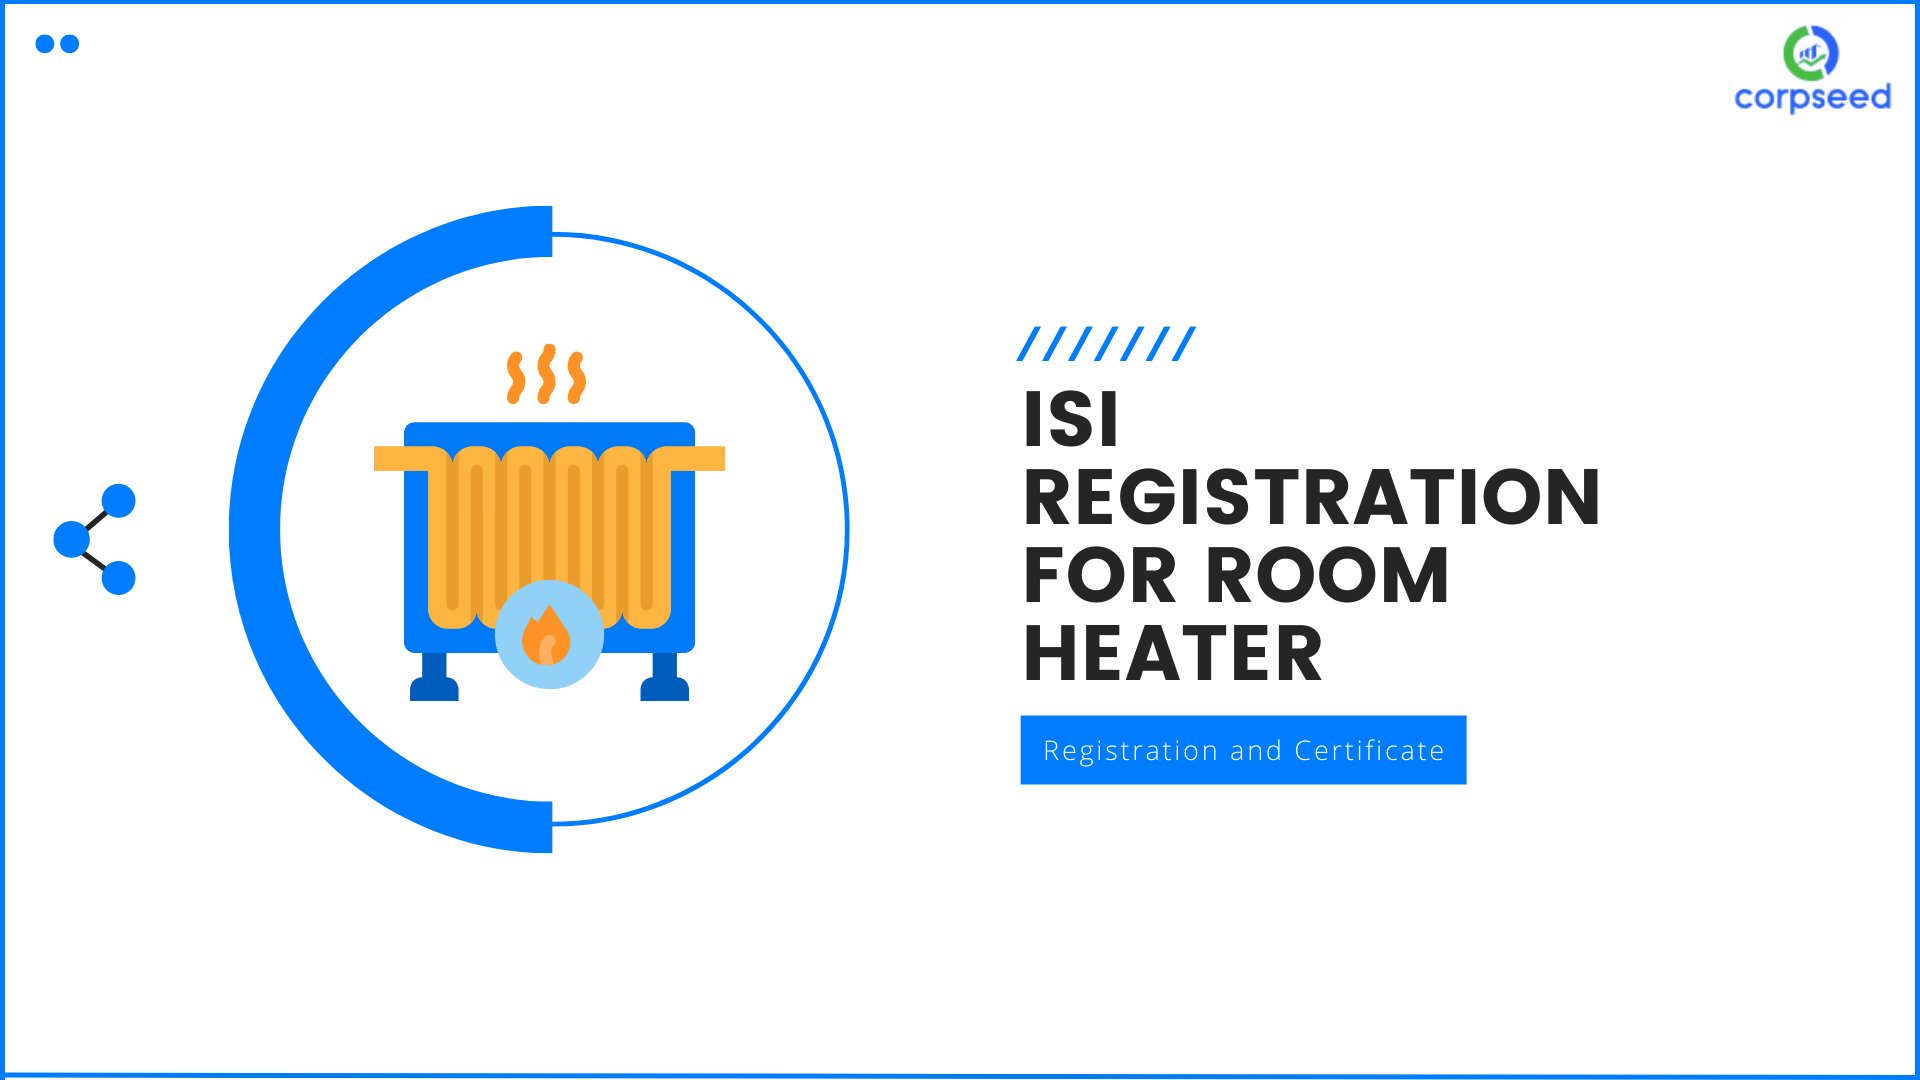 isi-registration-for-room-heater-is-302-part-2-sec-30_corpseed.png